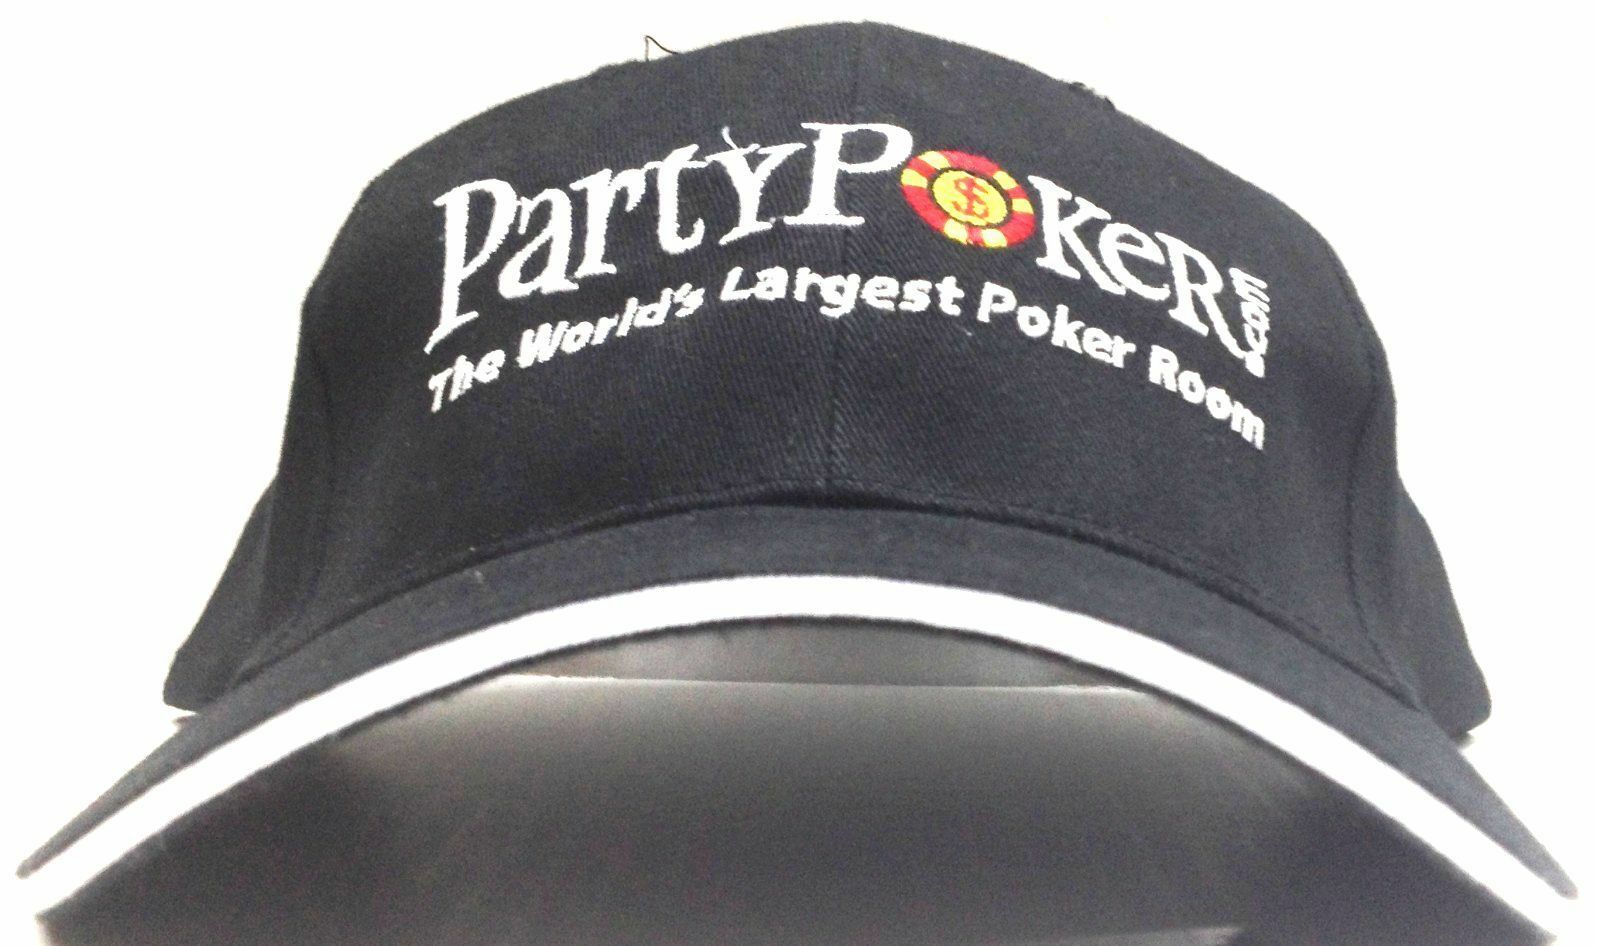 NEW PARTY POKER worlds largest POKER ROOM stitched adjustable CAP HAT osfa Image 1